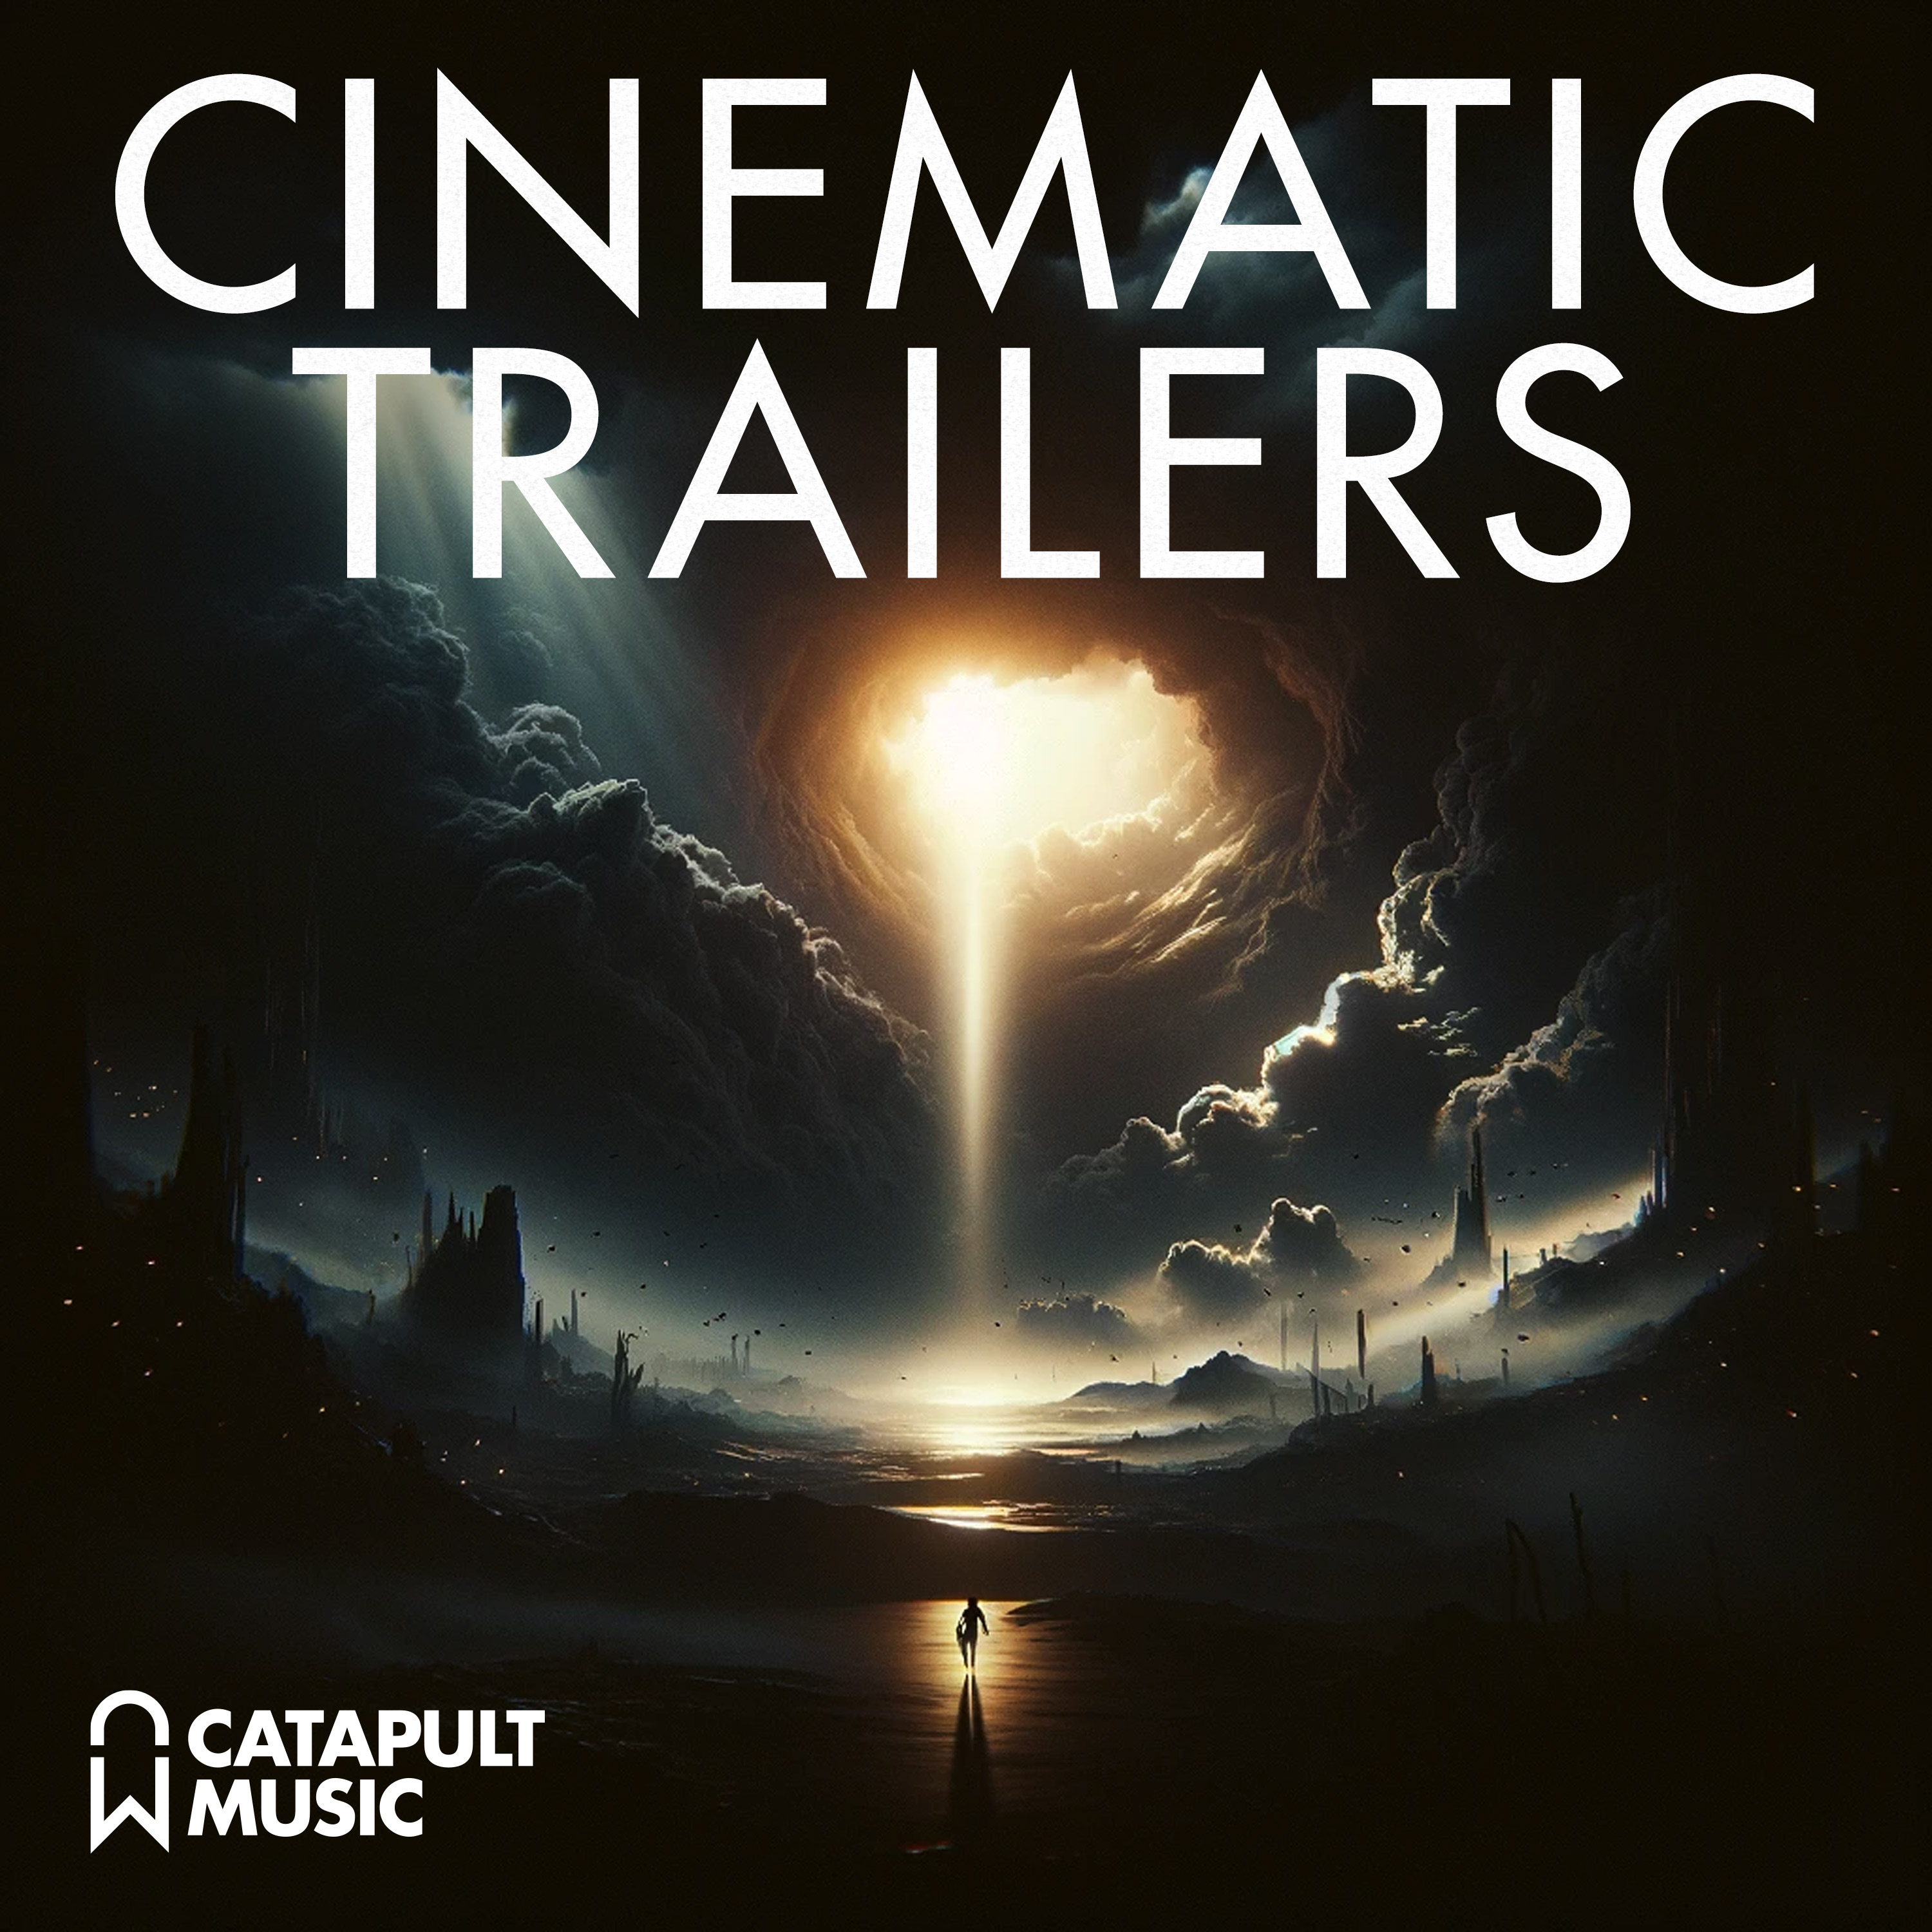 Cinematic Trailers